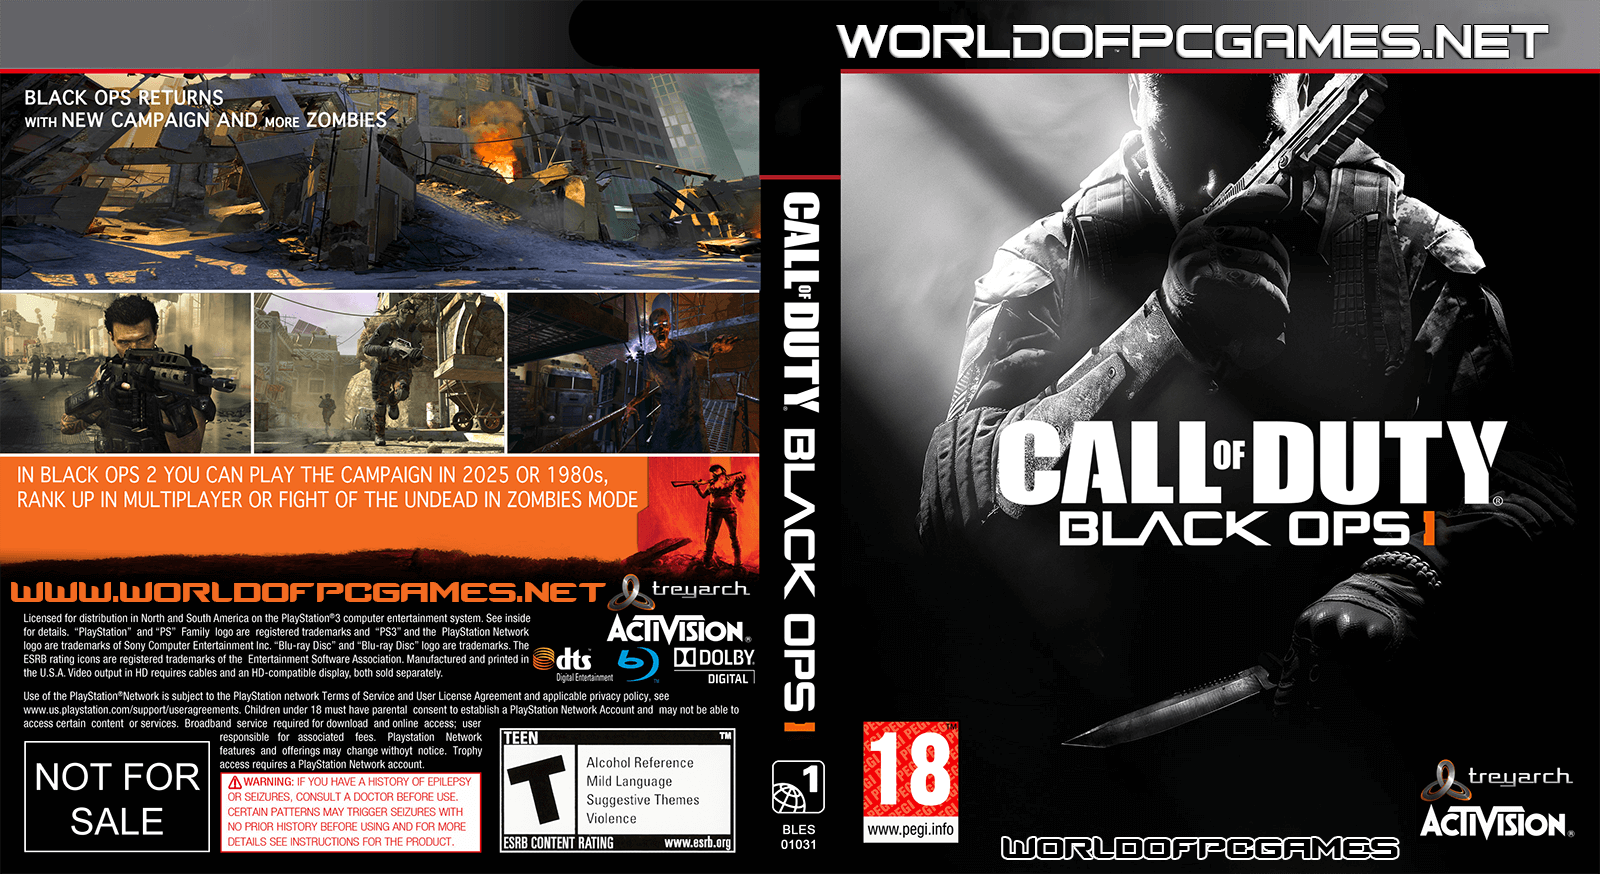 Black ops 2 PLAYSTATION. Call of Duty Black ops 3 ps3 диск. Call of Duty Black ops II ps3 обложка. Black ops 2 ps3. Диск игры call of duty